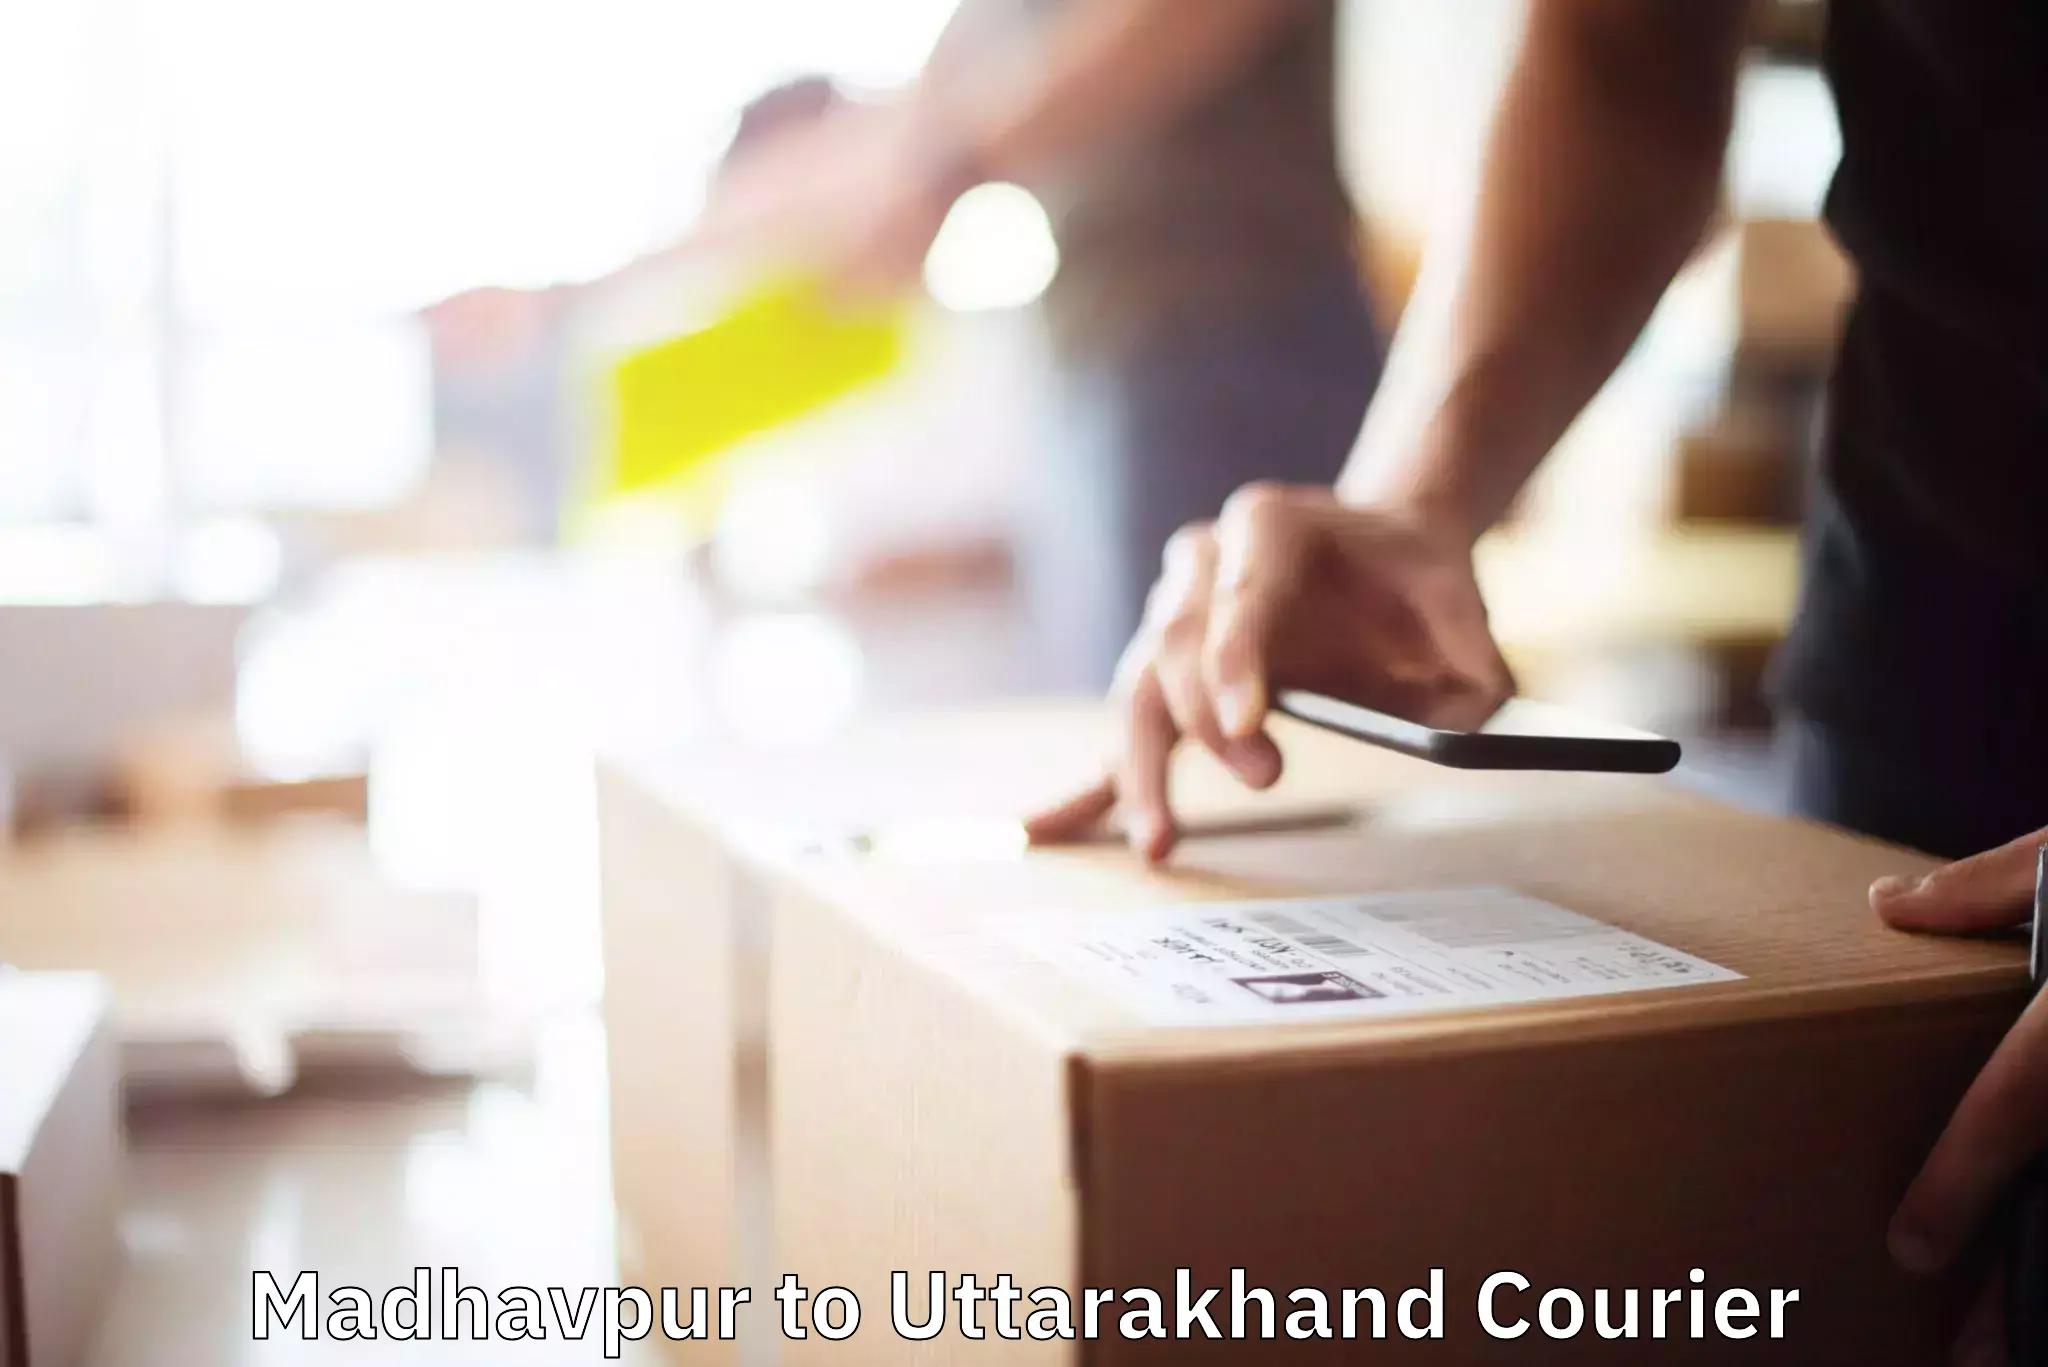 Efficient relocation services Madhavpur to Rishikesh